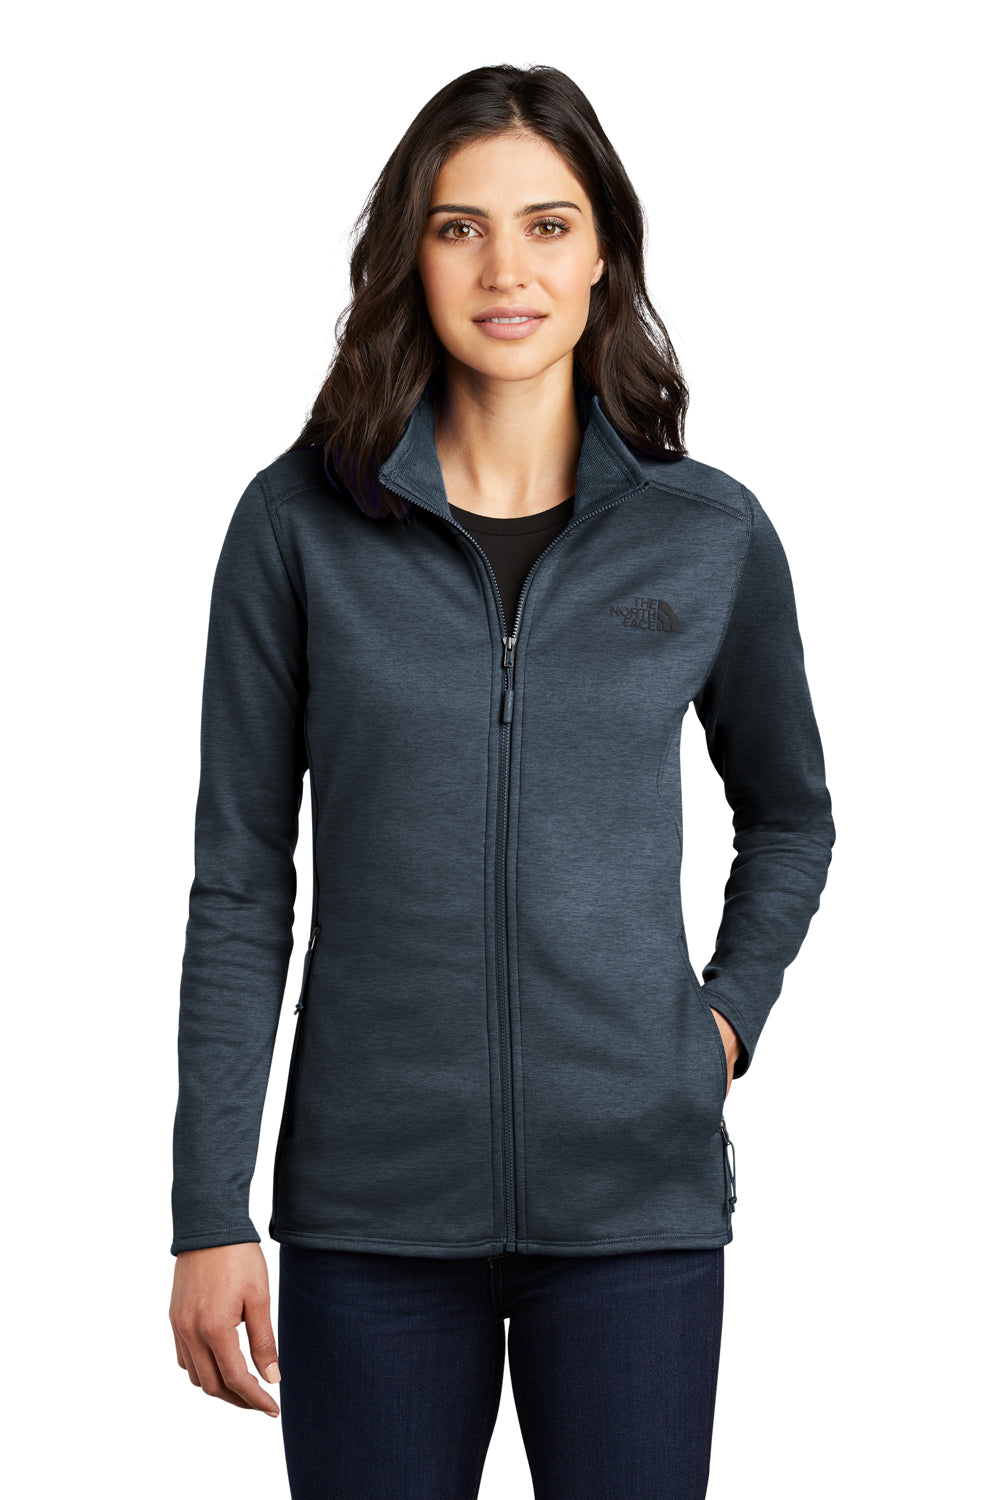 The North Face NF0A7V62 Womens Skyline Full Zip Fleece Jacket Heather Urban Navy Blue Front